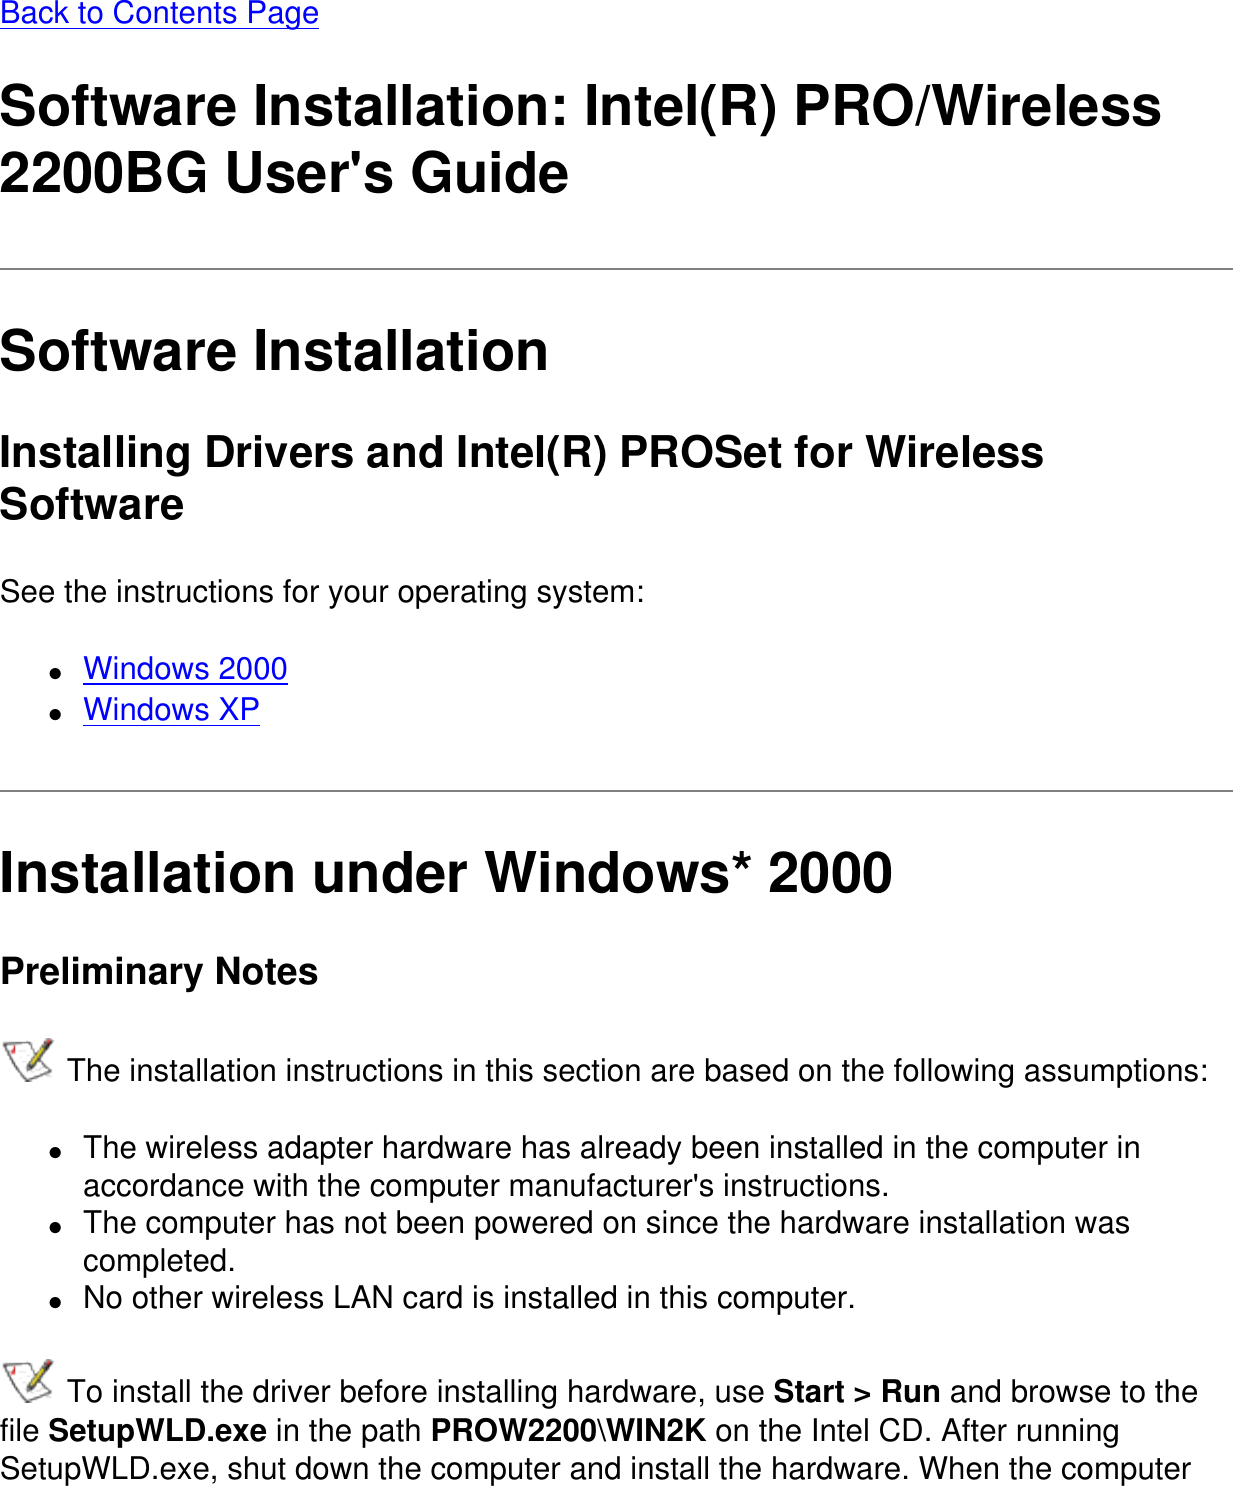 Back to Contents PageSoftware Installation: Intel(R) PRO/Wireless 2200BG User&apos;s GuideSoftware InstallationInstalling Drivers and Intel(R) PROSet for Wireless SoftwareSee the instructions for your operating system:●     Windows 2000●     Windows XPInstallation under Windows* 2000Preliminary Notes The installation instructions in this section are based on the following assumptions:●     The wireless adapter hardware has already been installed in the computer in accordance with the computer manufacturer&apos;s instructions.●     The computer has not been powered on since the hardware installation was completed.●     No other wireless LAN card is installed in this computer. To install the driver before installing hardware, use Start &gt; Run and browse to the file SetupWLD.exe in the path PROW2200\WIN2K on the Intel CD. After running SetupWLD.exe, shut down the computer and install the hardware. When the computer 